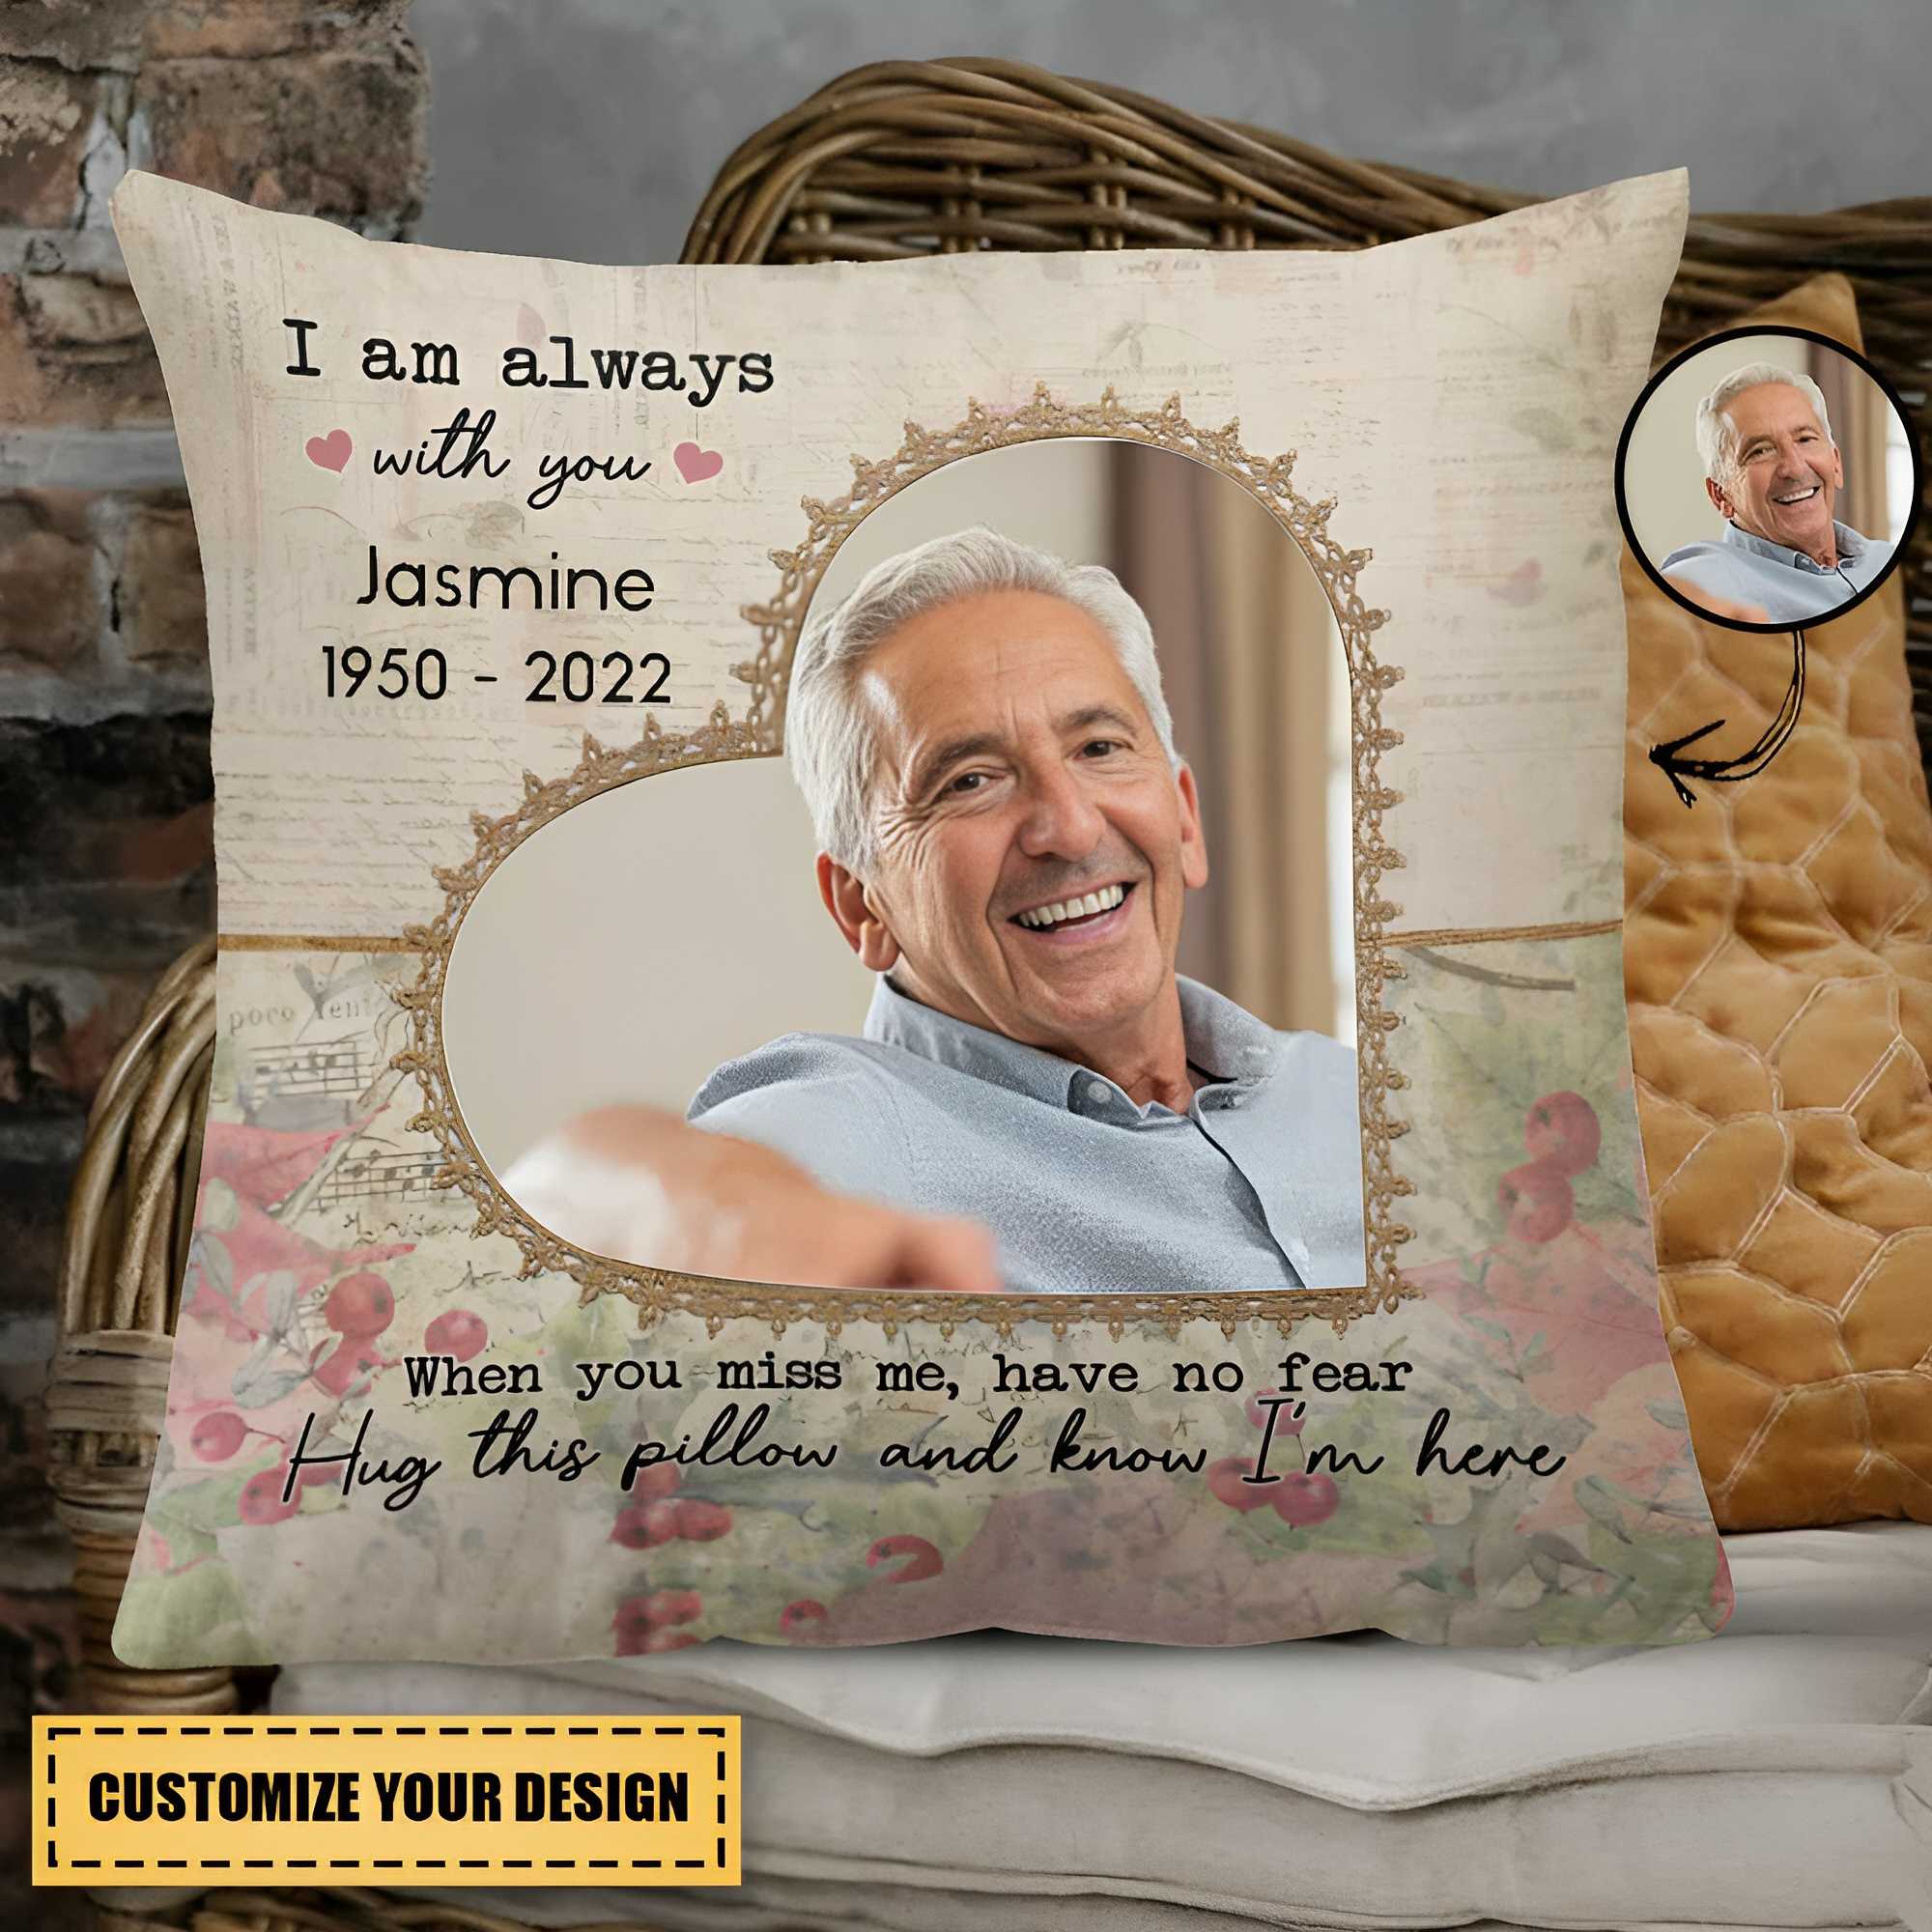 Hug This Pillow And Know I'm Here - Personalized Photo Pillowcase